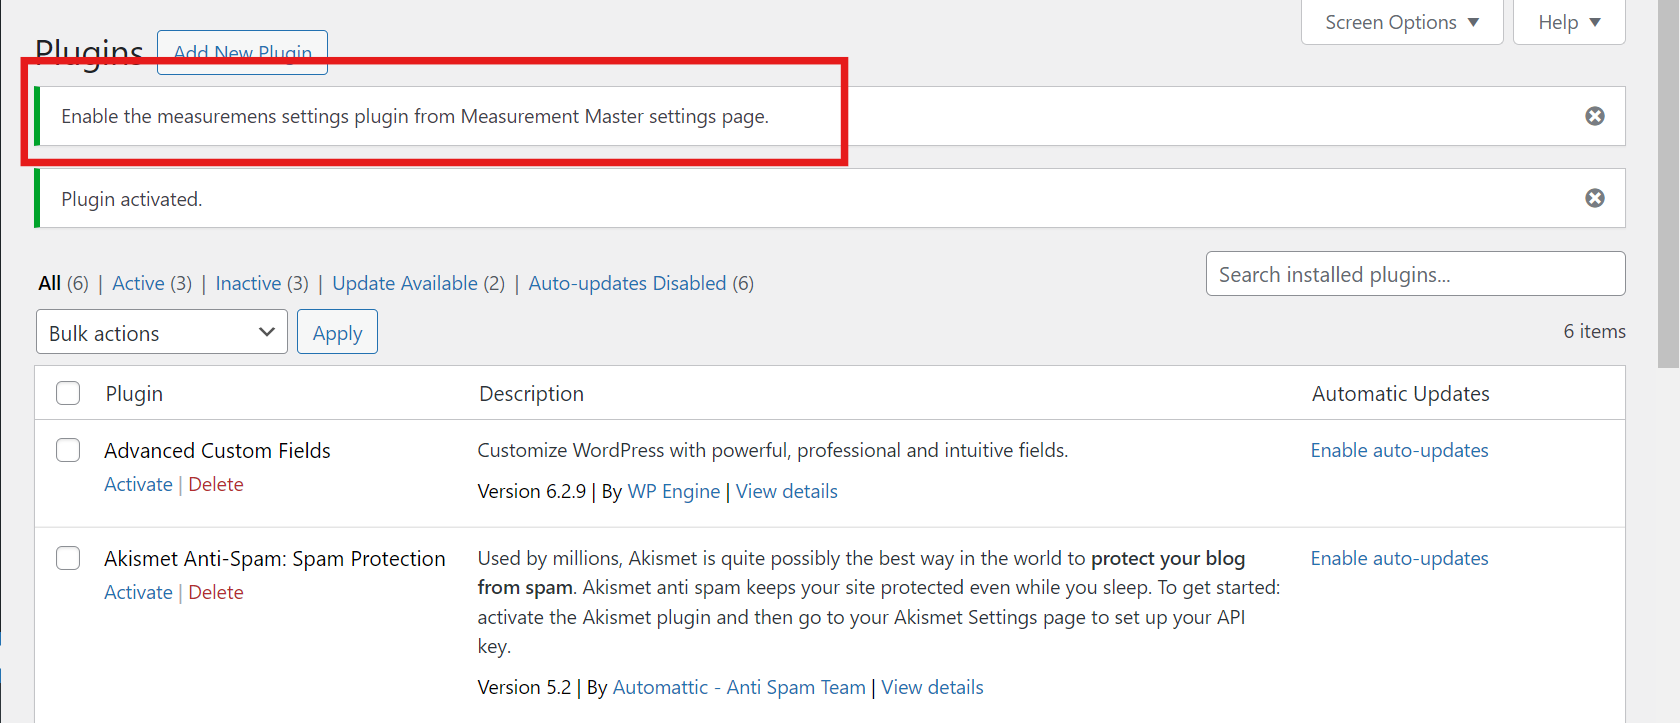 How to Display Notice in Admin Panel on Plugin Activation